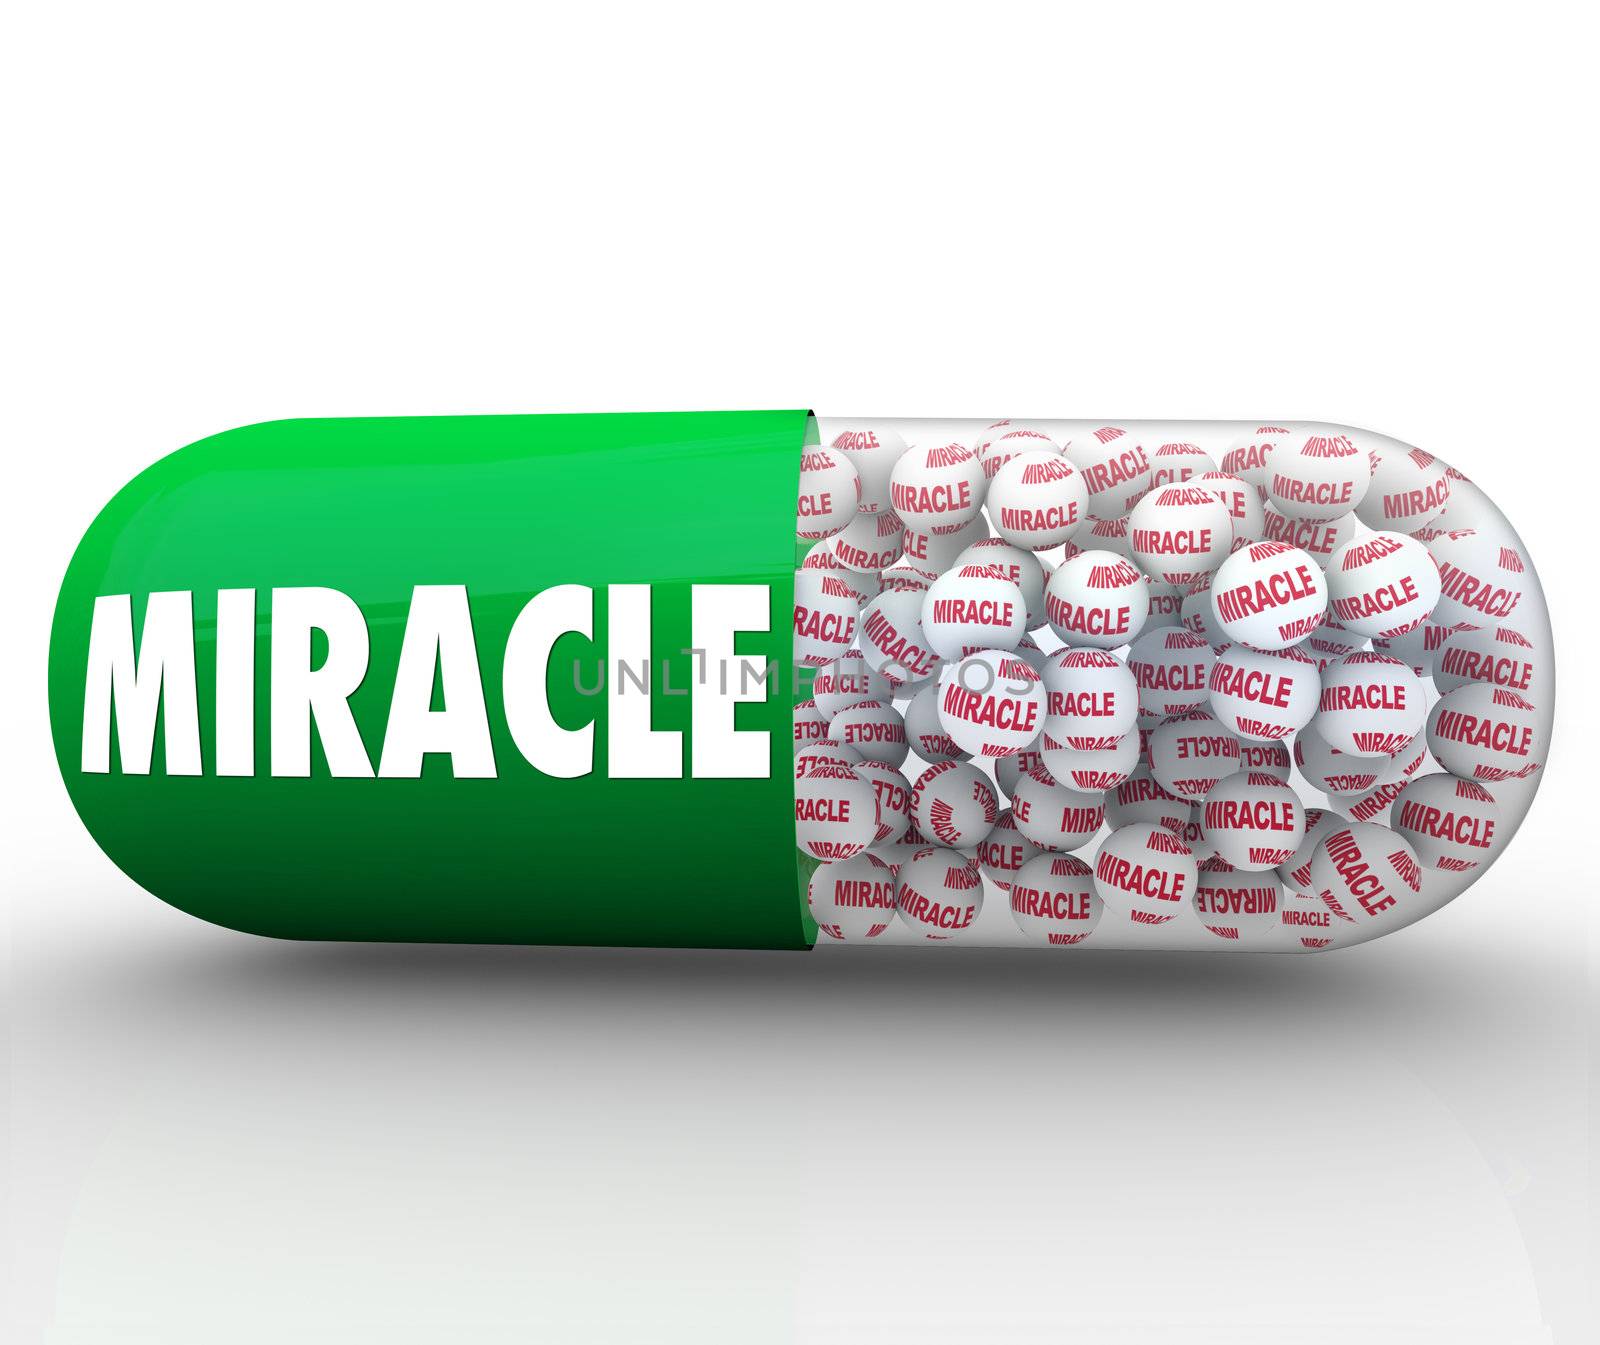 Instant Miracle Capsule Pill Offers Salvation Recovery by iQoncept